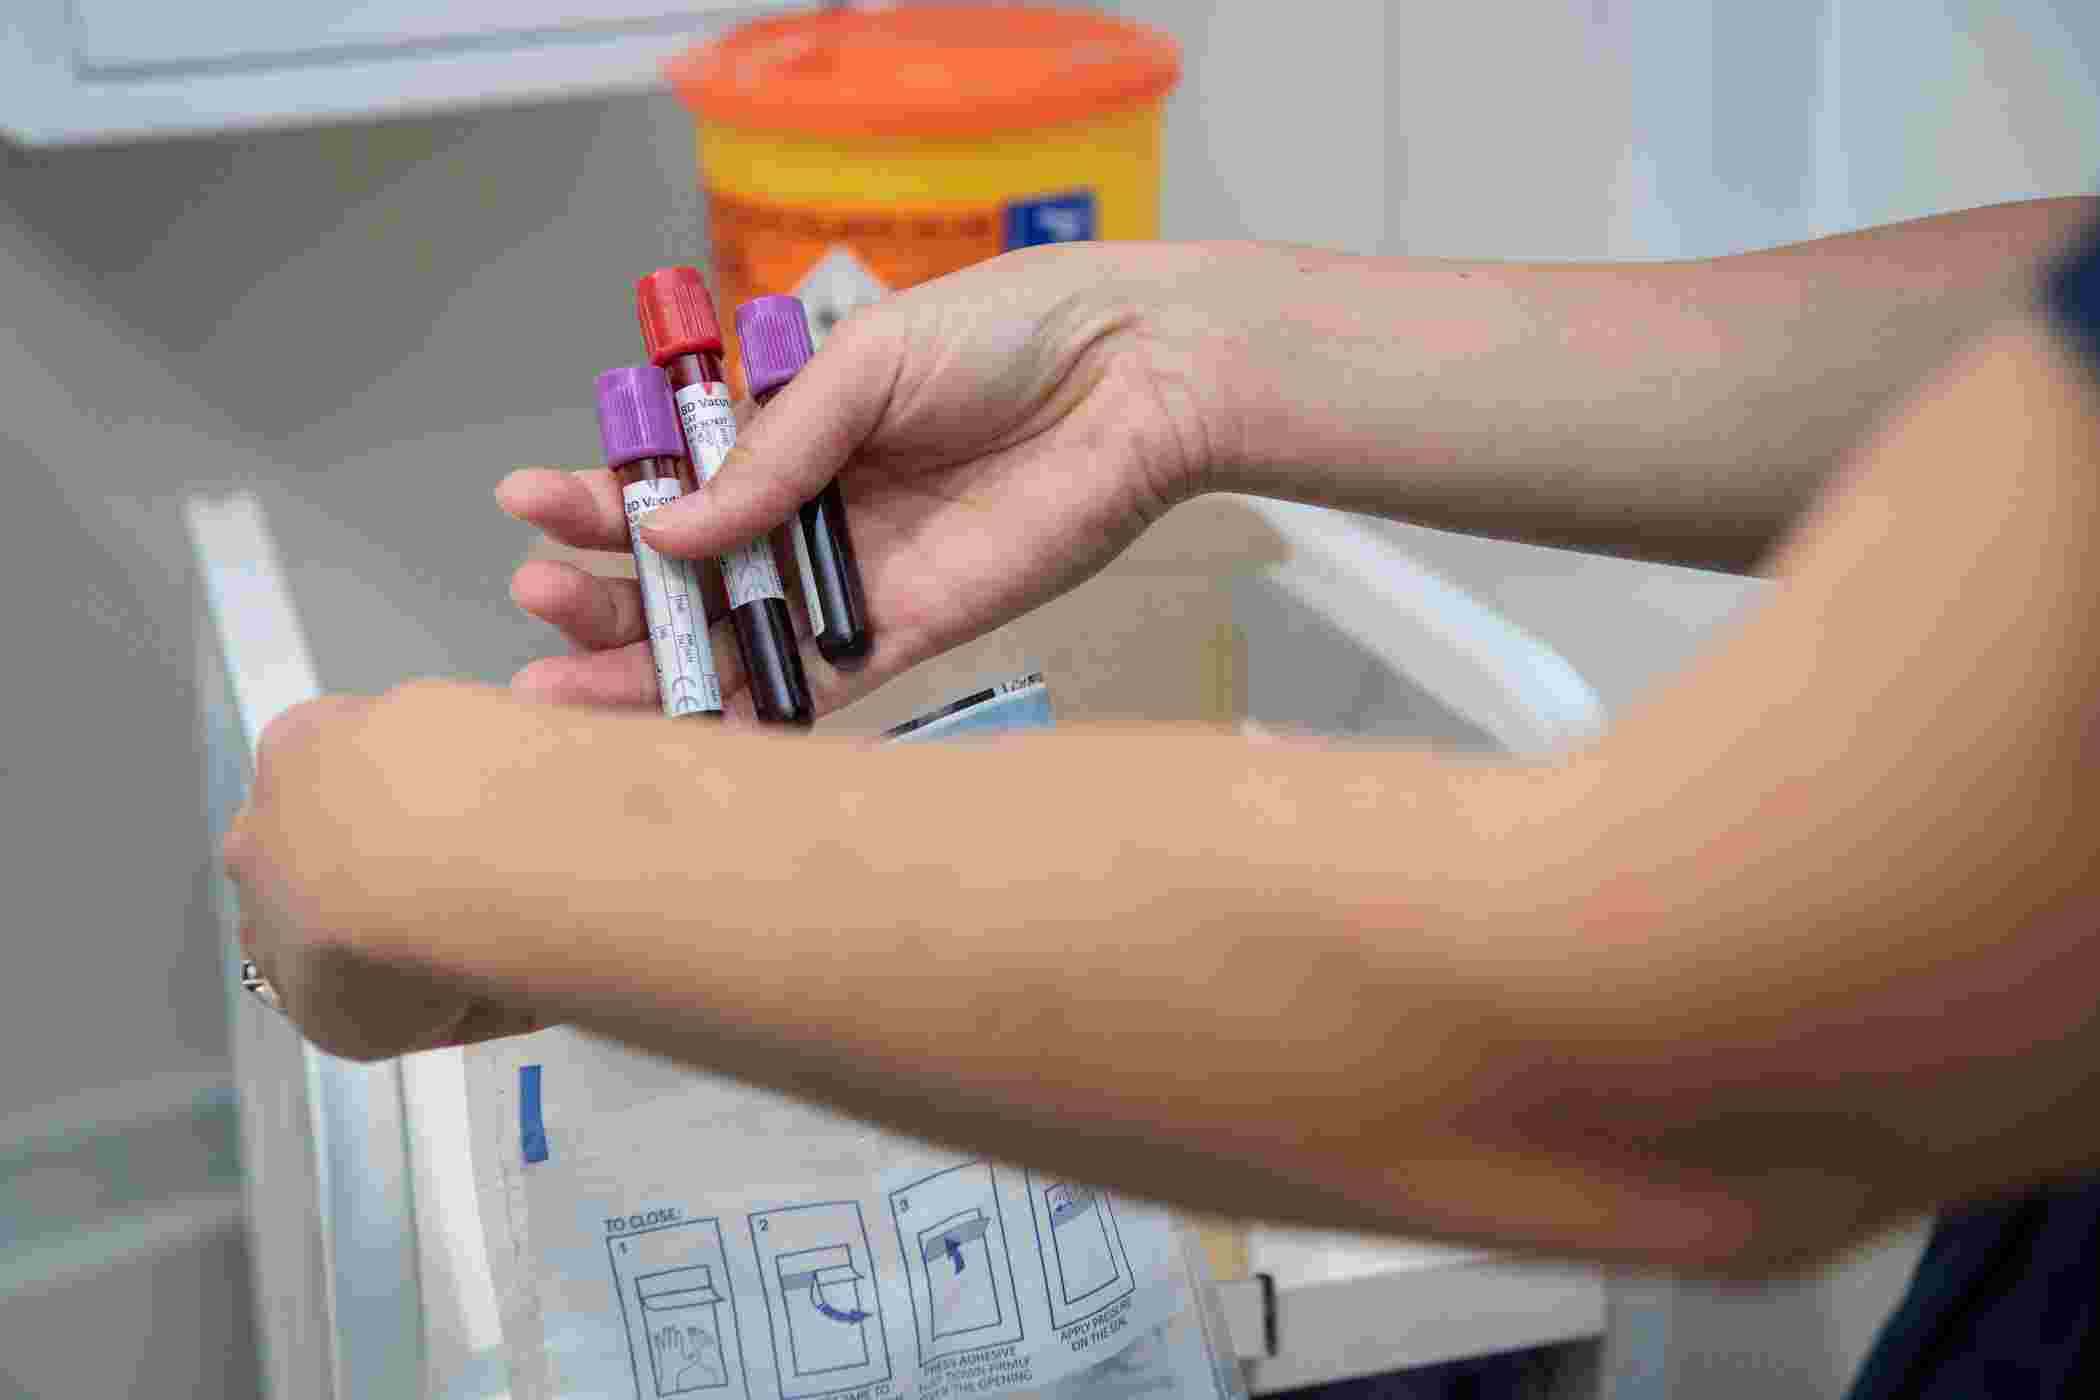 Blood samples in test tubes being placed into a biosample bag